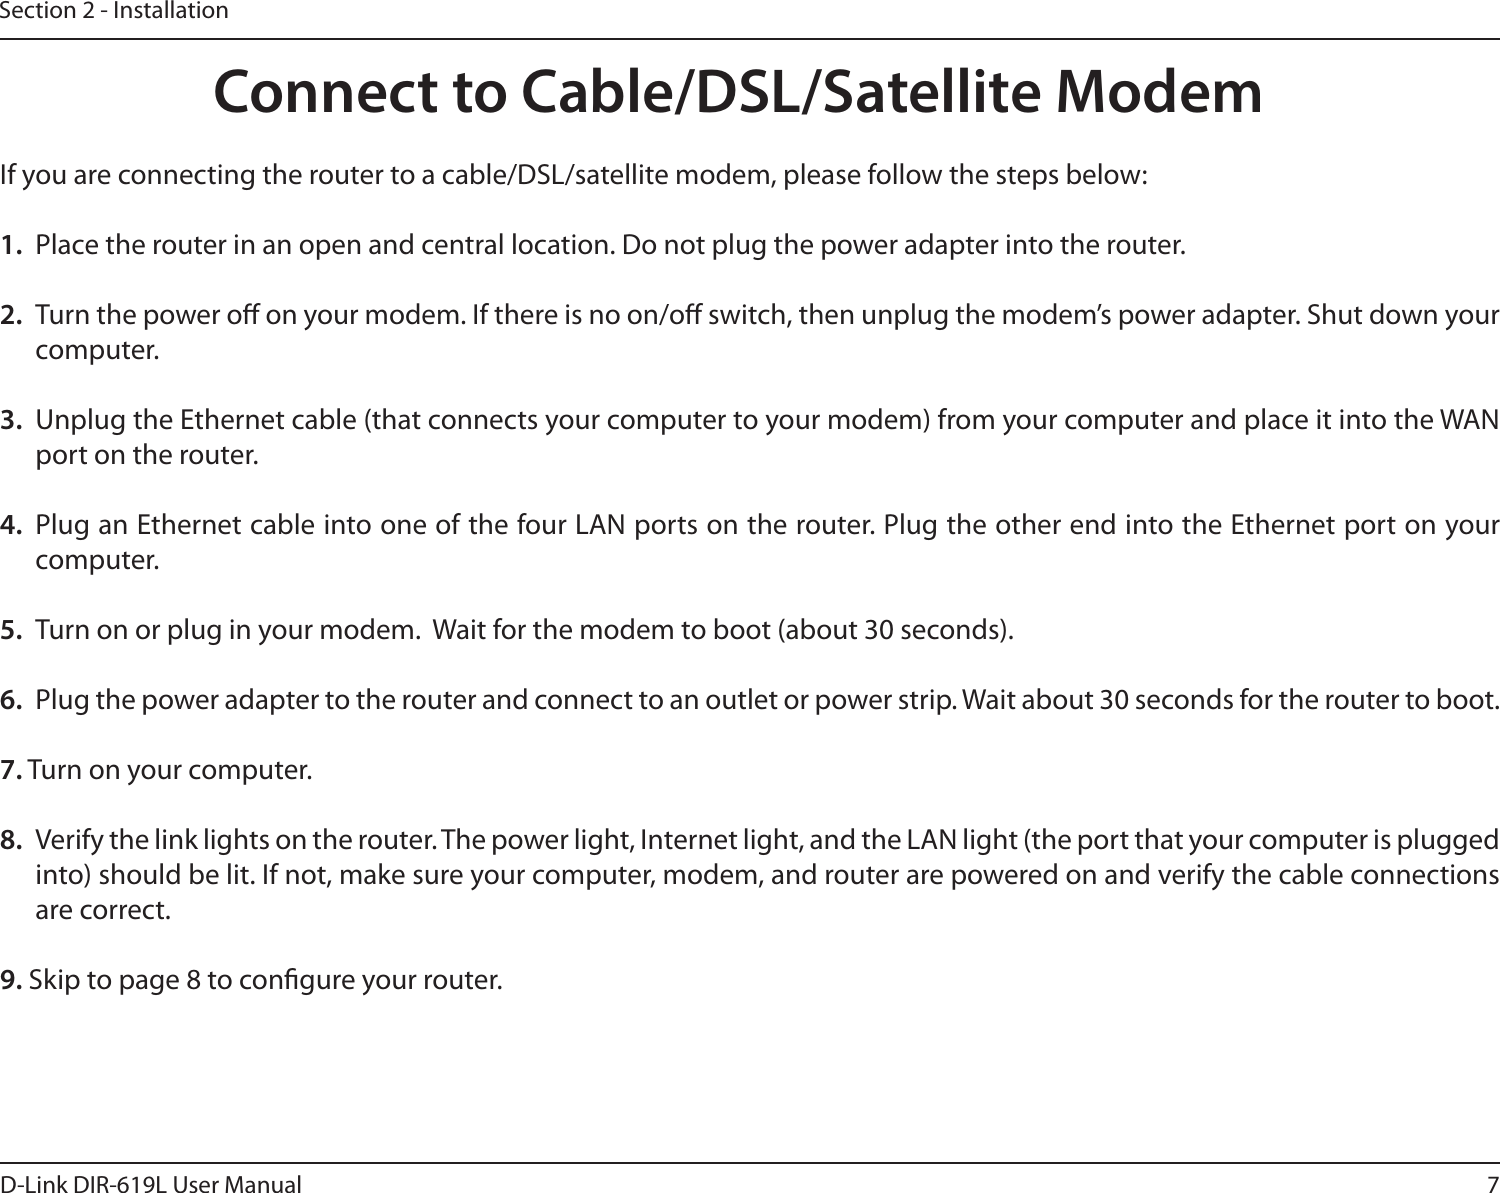 7D-Link DIR-619L User ManualSection 2 - InstallationIf you are connecting the router to a cable/DSL/satellite modem, please follow the steps below:1.  Place the router in an open and central location. Do not plug the power adapter into the router. 2.  Turn the power o on your modem. If there is no on/o switch, then unplug the modem’s power adapter. Shut down your computer.3.  Unplug the Ethernet cable (that connects your computer to your modem) from your computer and place it into the WAN port on the router.  4.  Plug an Ethernet cable into one of the four LAN ports on the router. Plug the other end into the Ethernet port on your computer.5.  Turn on or plug in your modem.  Wait for the modem to boot (about 30 seconds). 6.  Plug the power adapter to the router and connect to an outlet or power strip. Wait about 30 seconds for the router to boot. 7. Turn on your computer. 8.  Verify the link lights on the router. The power light, Internet light, and the LAN light (the port that your computer is plugged into) should be lit. If not, make sure your computer, modem, and router are powered on and verify the cable connections are correct. 9. Skip to page 8 to congure your router. Connect to Cable/DSL/Satellite Modem